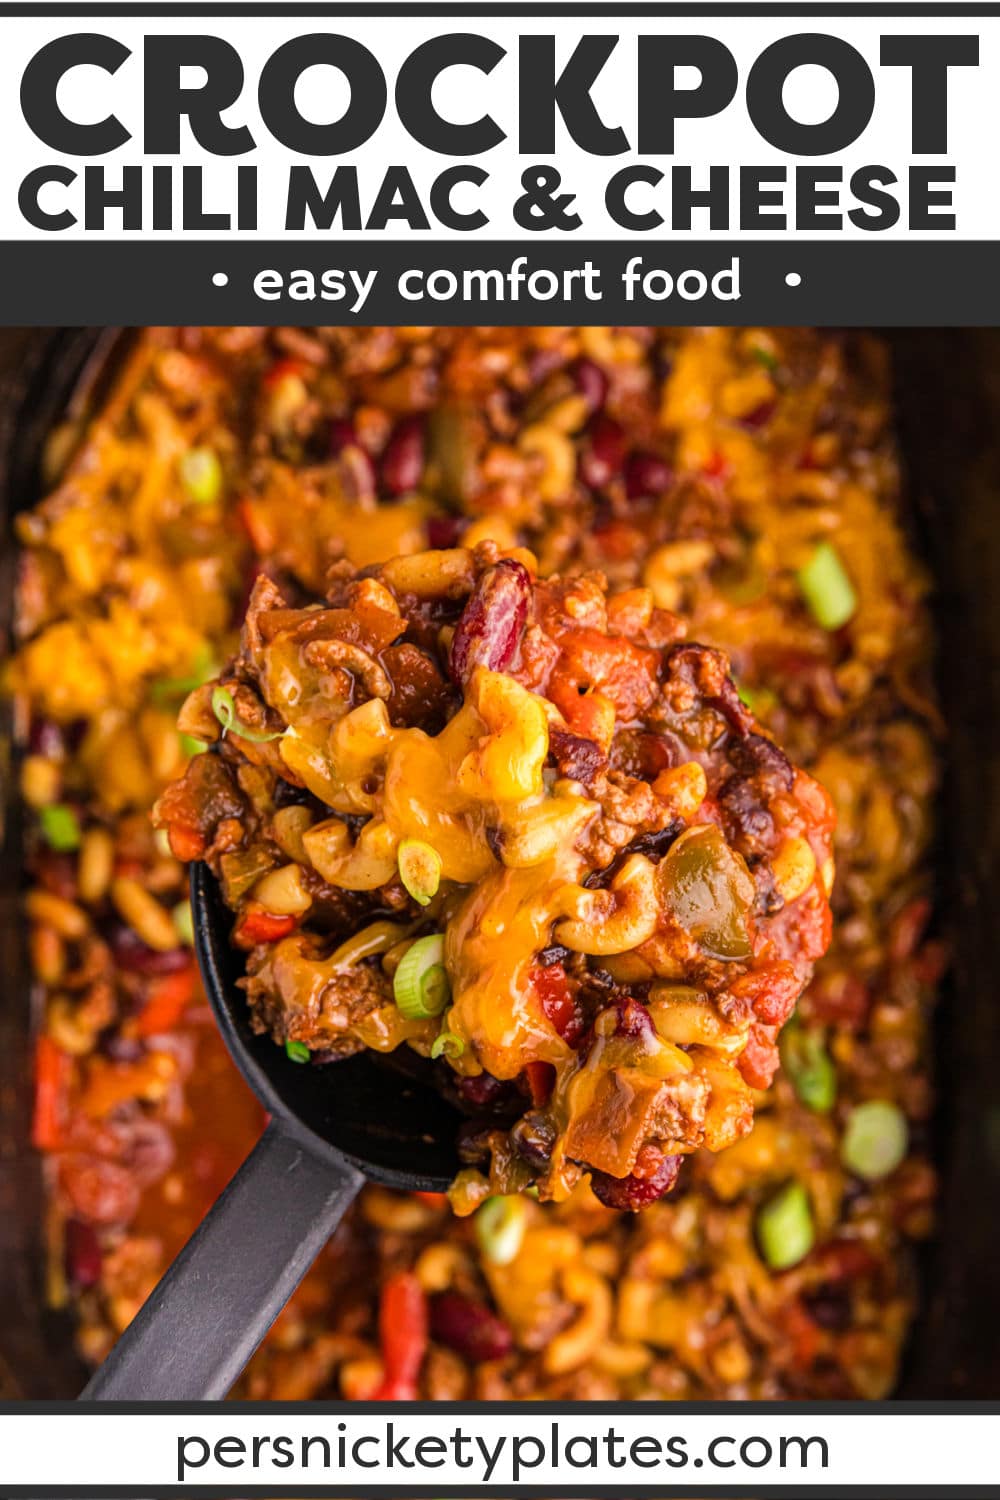 This easy slow cooker chili mac and cheese has everything you love about two classic comfort dishes! Loads of beefy chili, tender noodles and melted cheese, coated in a rich, flavorful tomato sauce. It’s easy to make in the crockpot and the perfect meal to come home to! | www.persnicketyplates.com